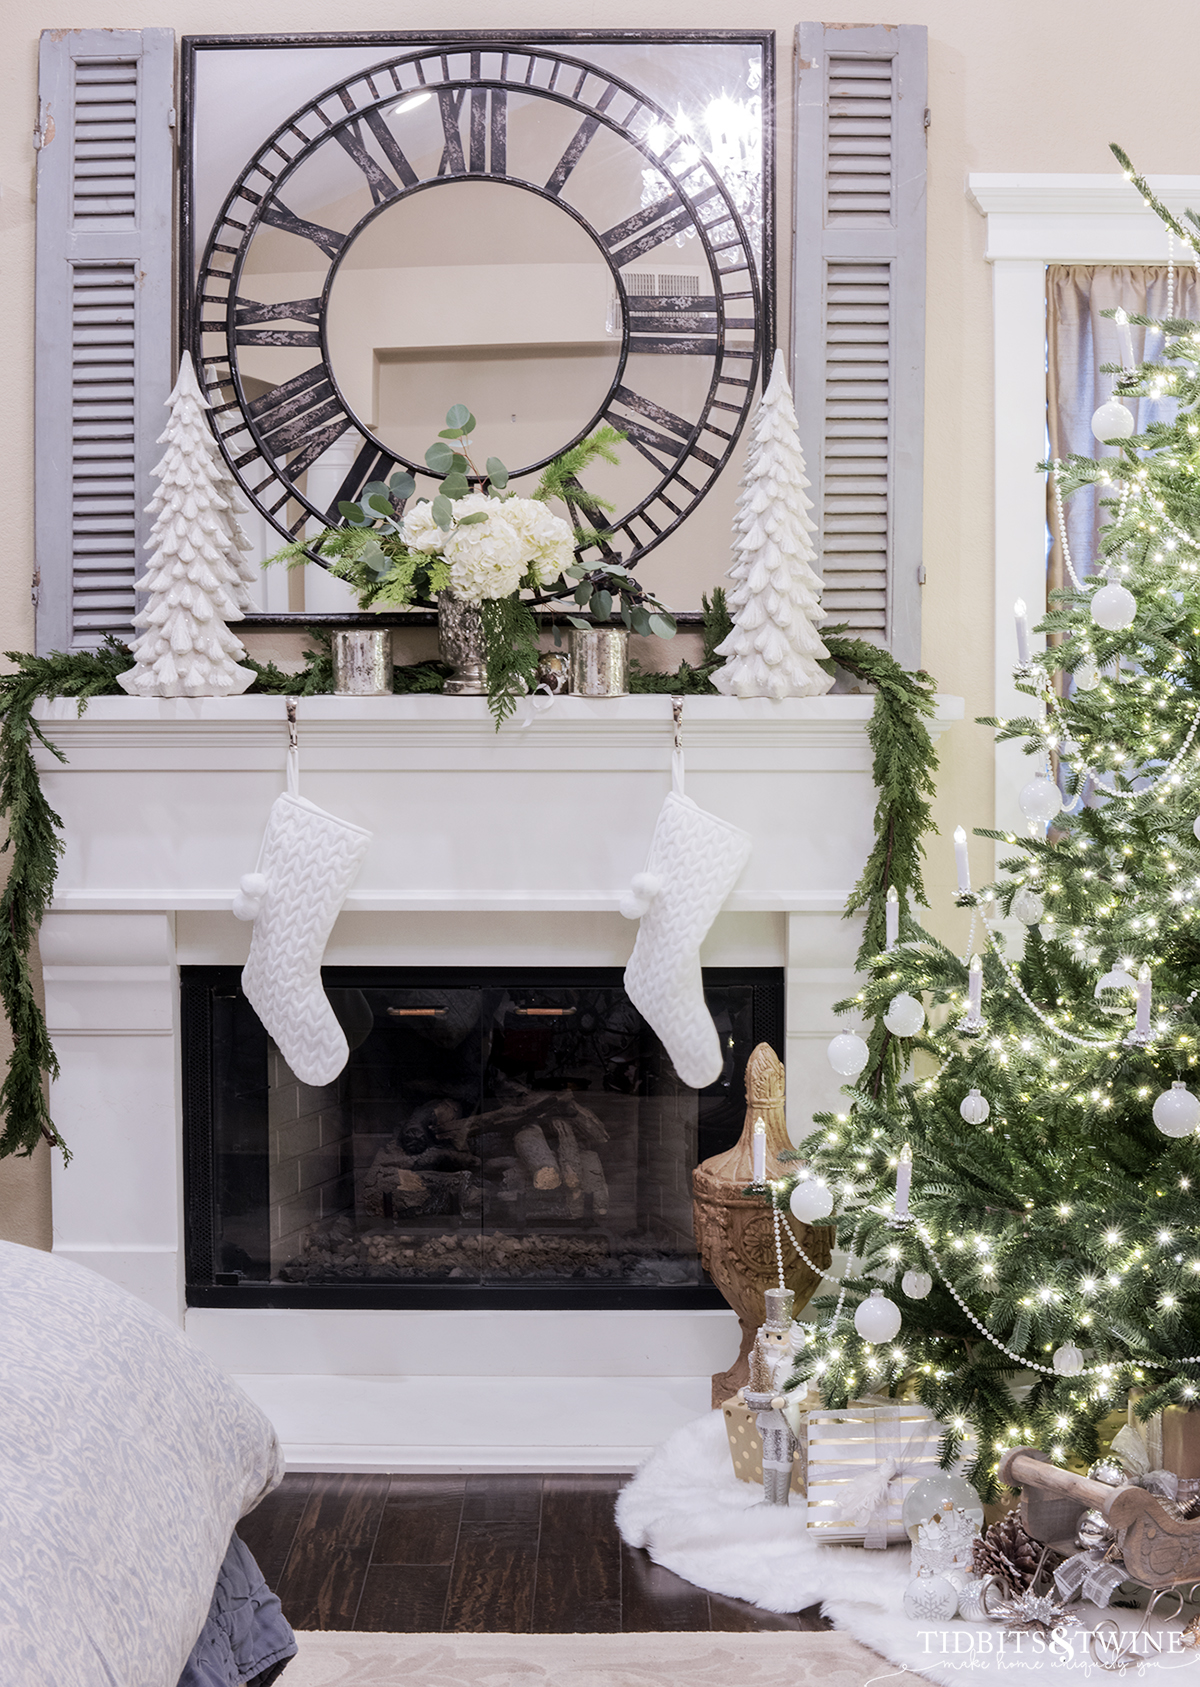 bedroom fireplace with mantel decorated for christmas with white trees greenery and hydrangeas and tree in the corner